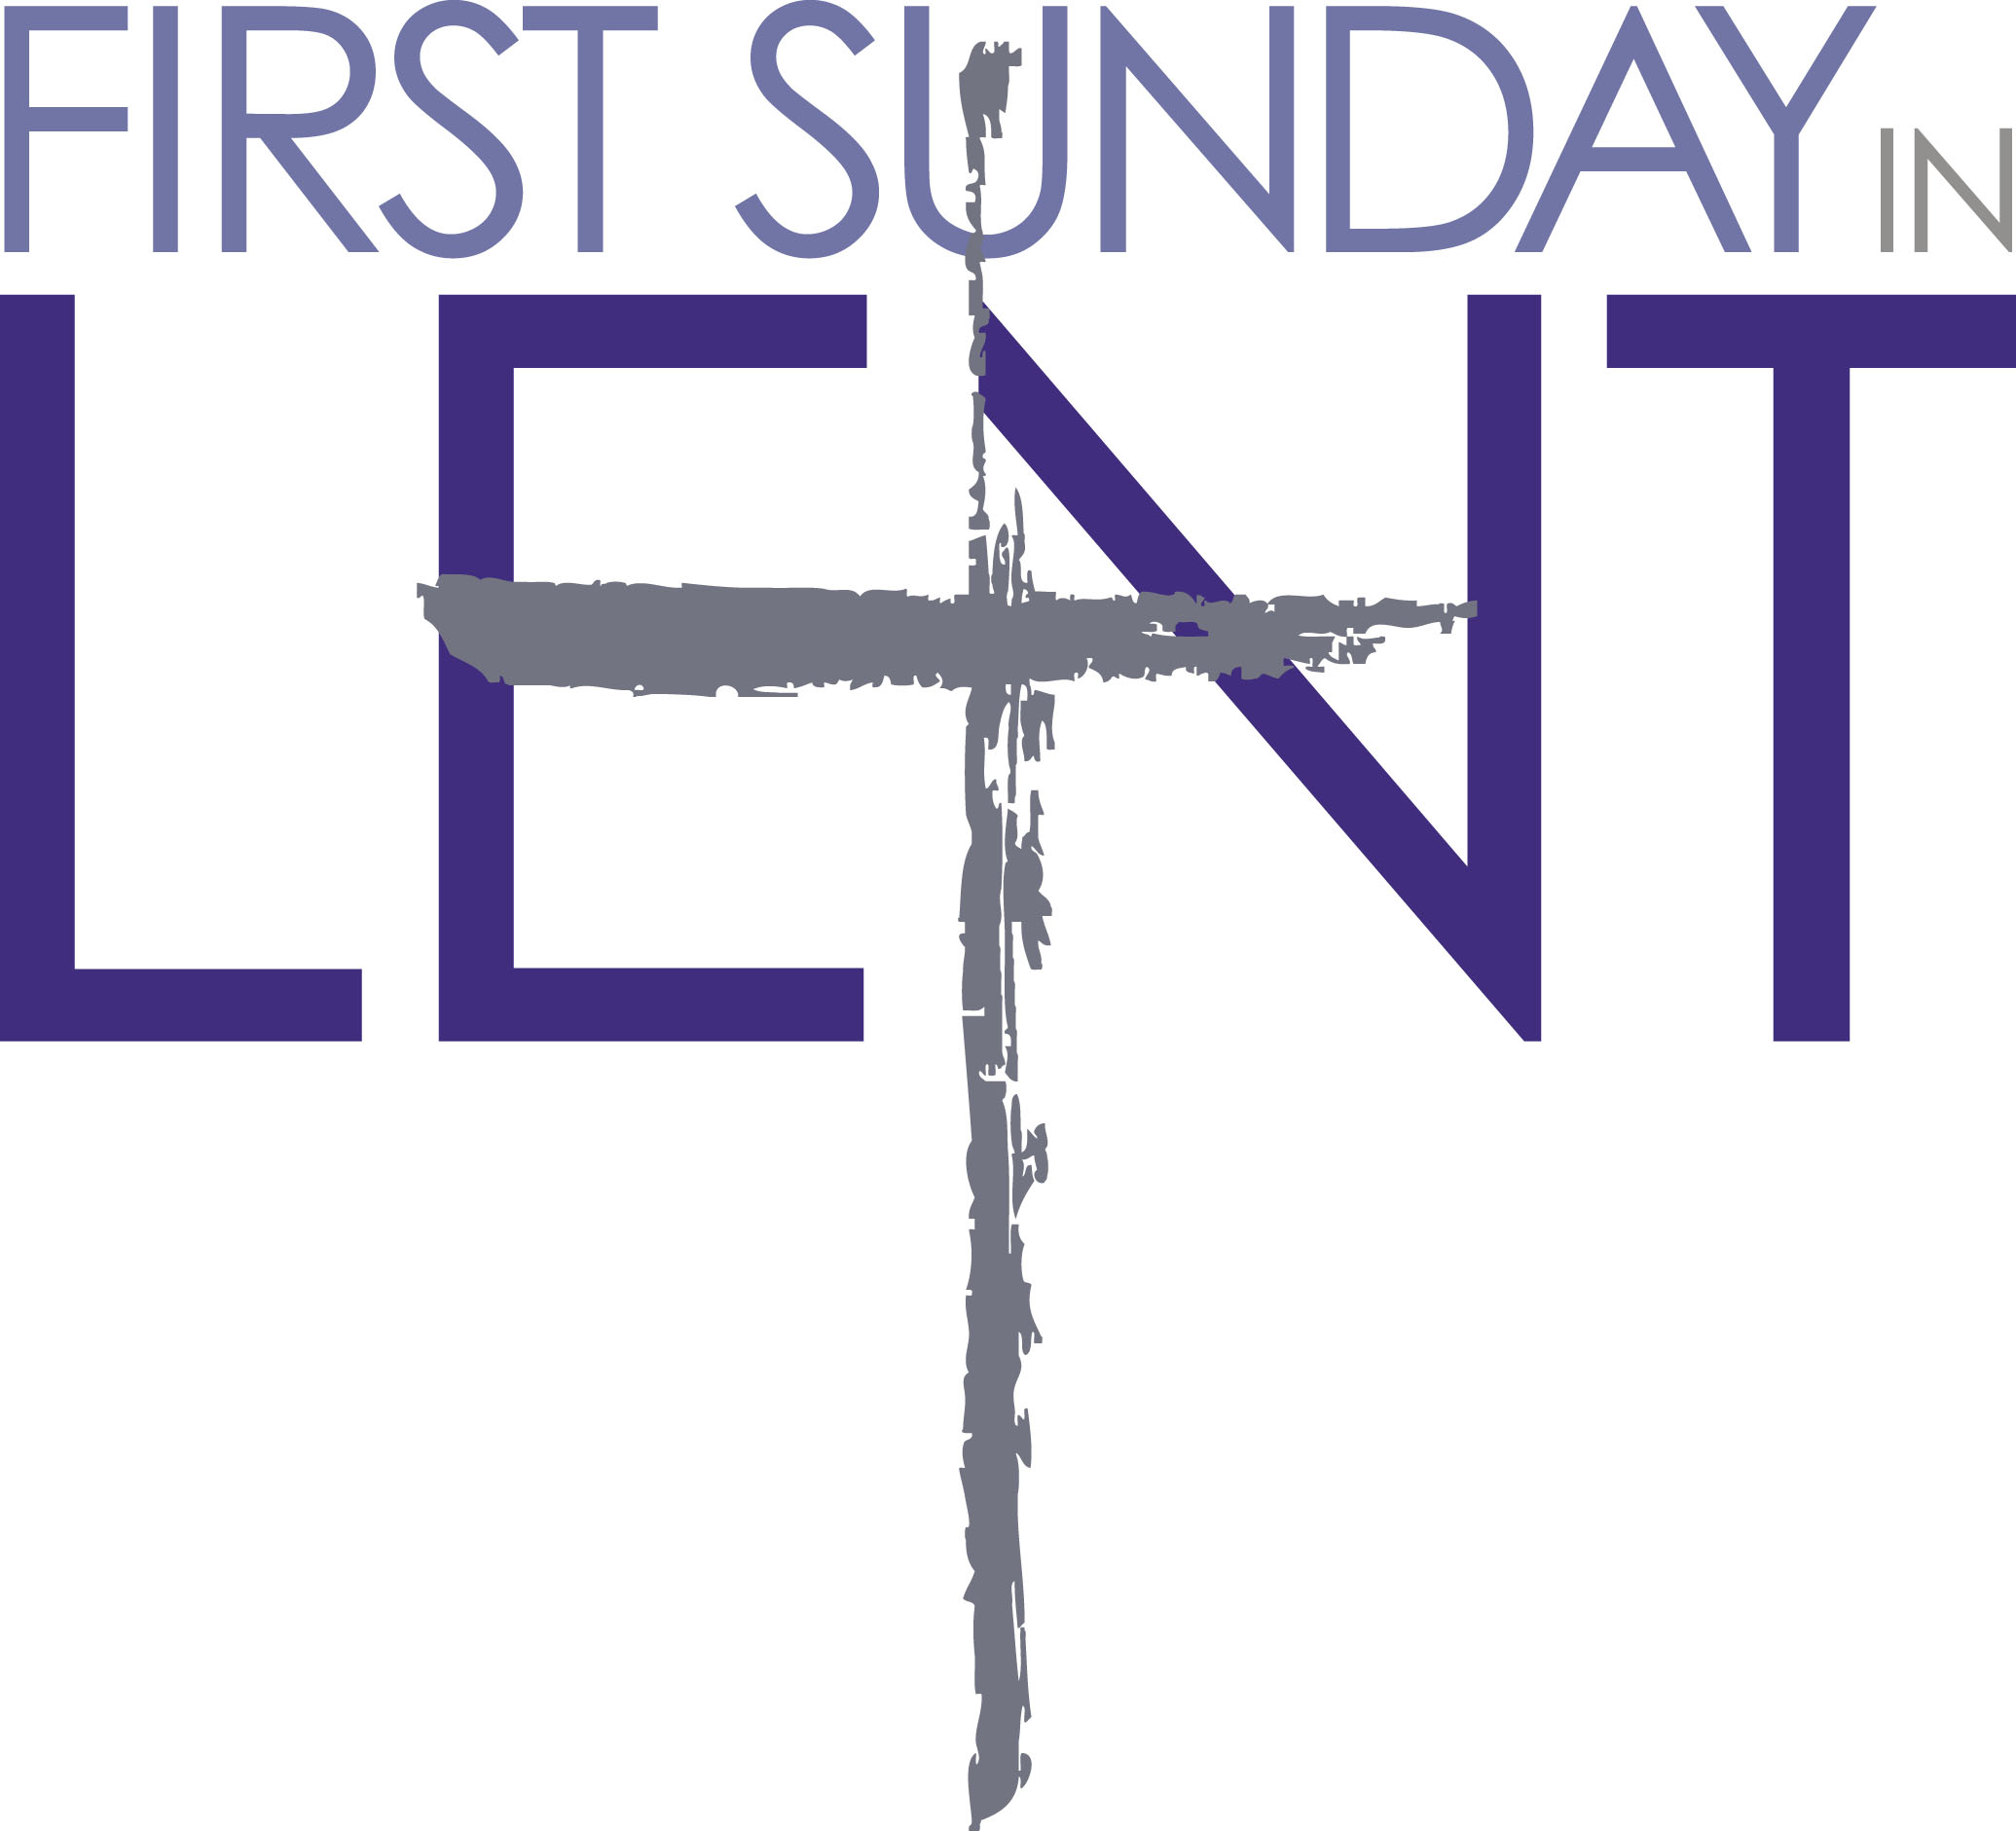 Lent clipart first sunday, Picture 2909270 lent clipart first sunday